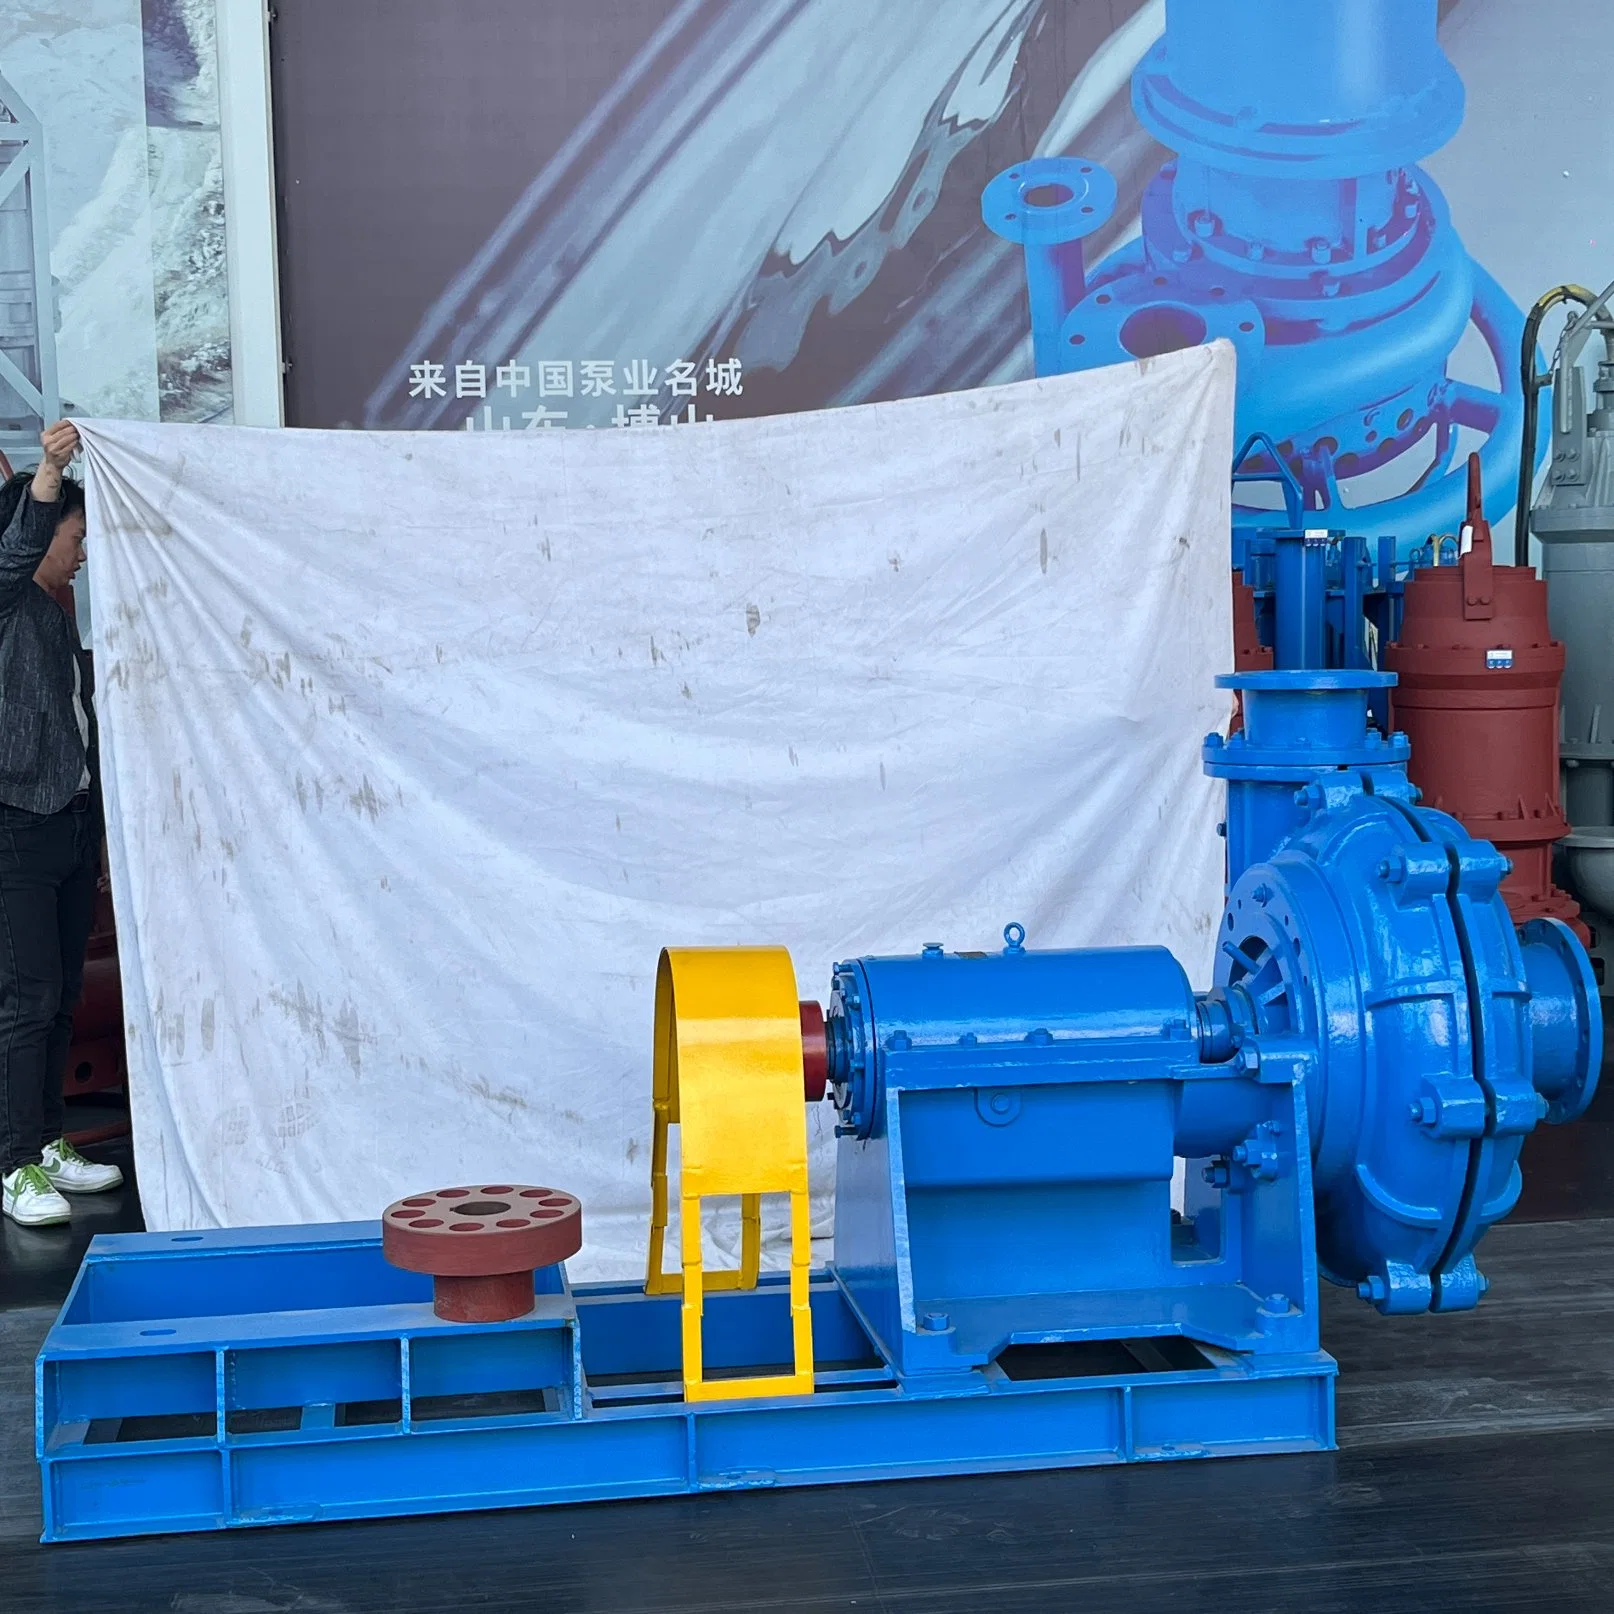 Industrial Horizontal End Suction Bare Shaft Industry Centrifugal Water Motor Pump for Water Supply System